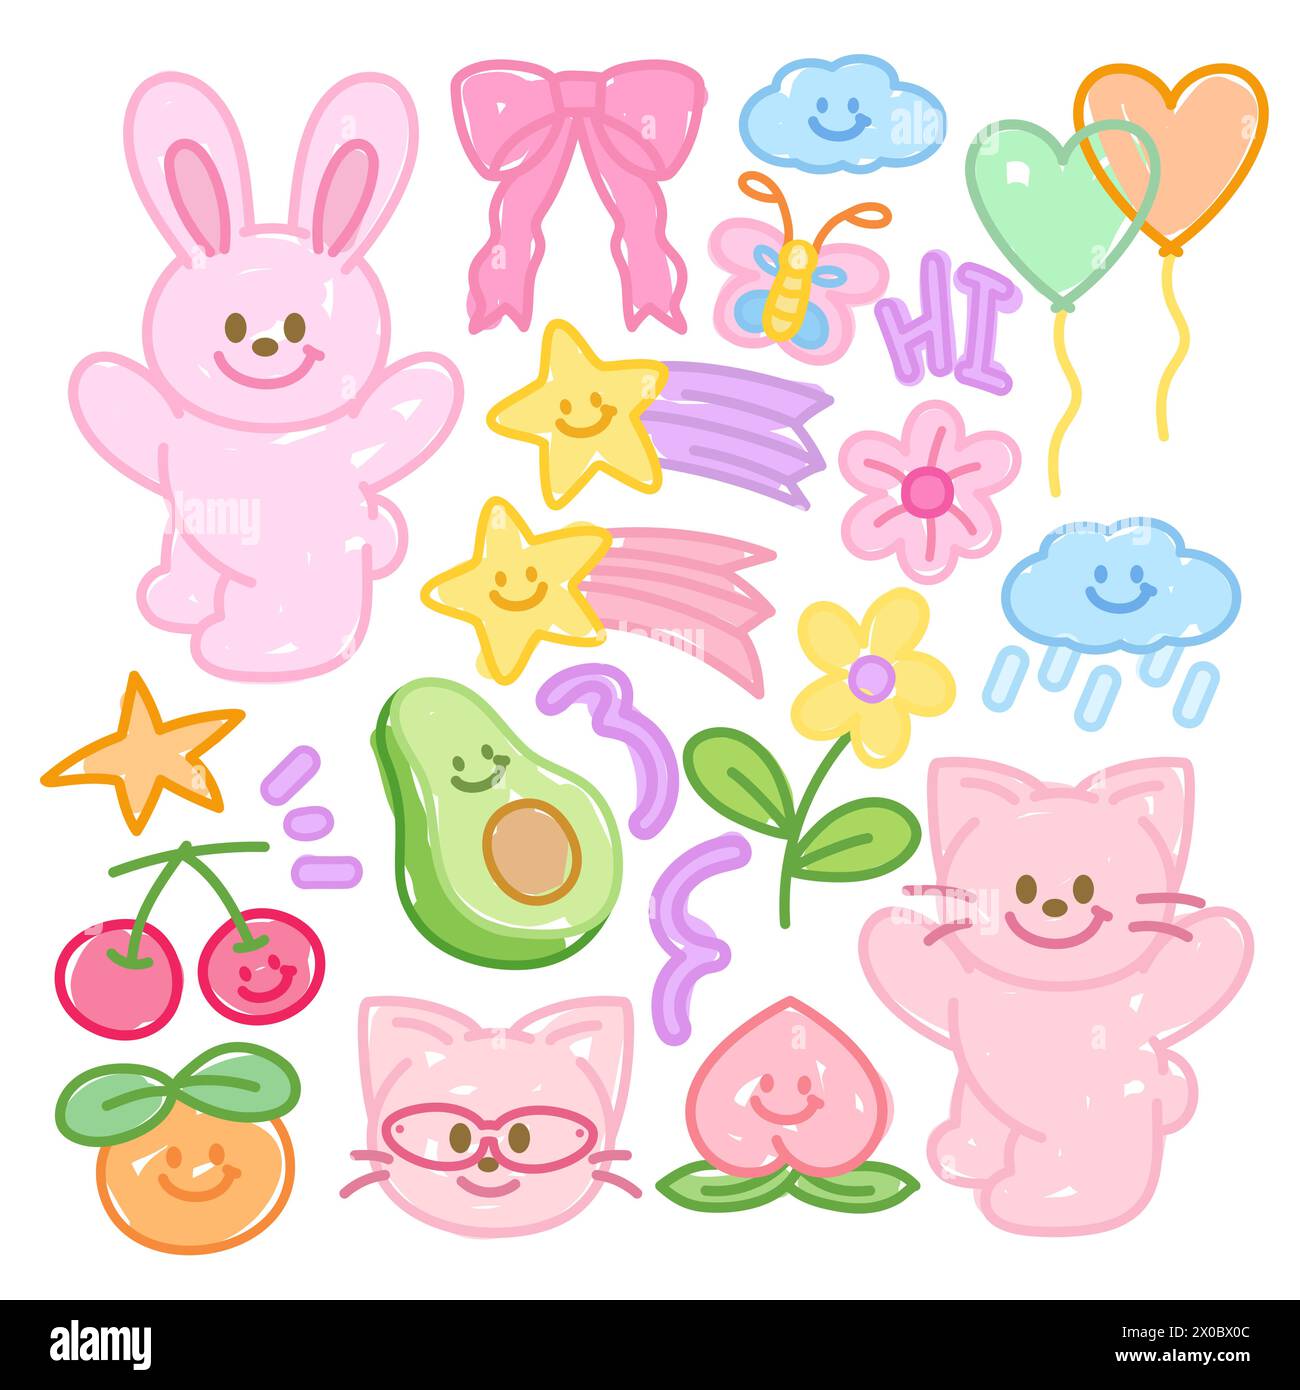 Cute doodle elements of pink bunny, butterfly, cat, cherry, avocado, orange, peach, pink ribbon, cloud, rain, flowers, shooting star, heart balloon Stock Vector